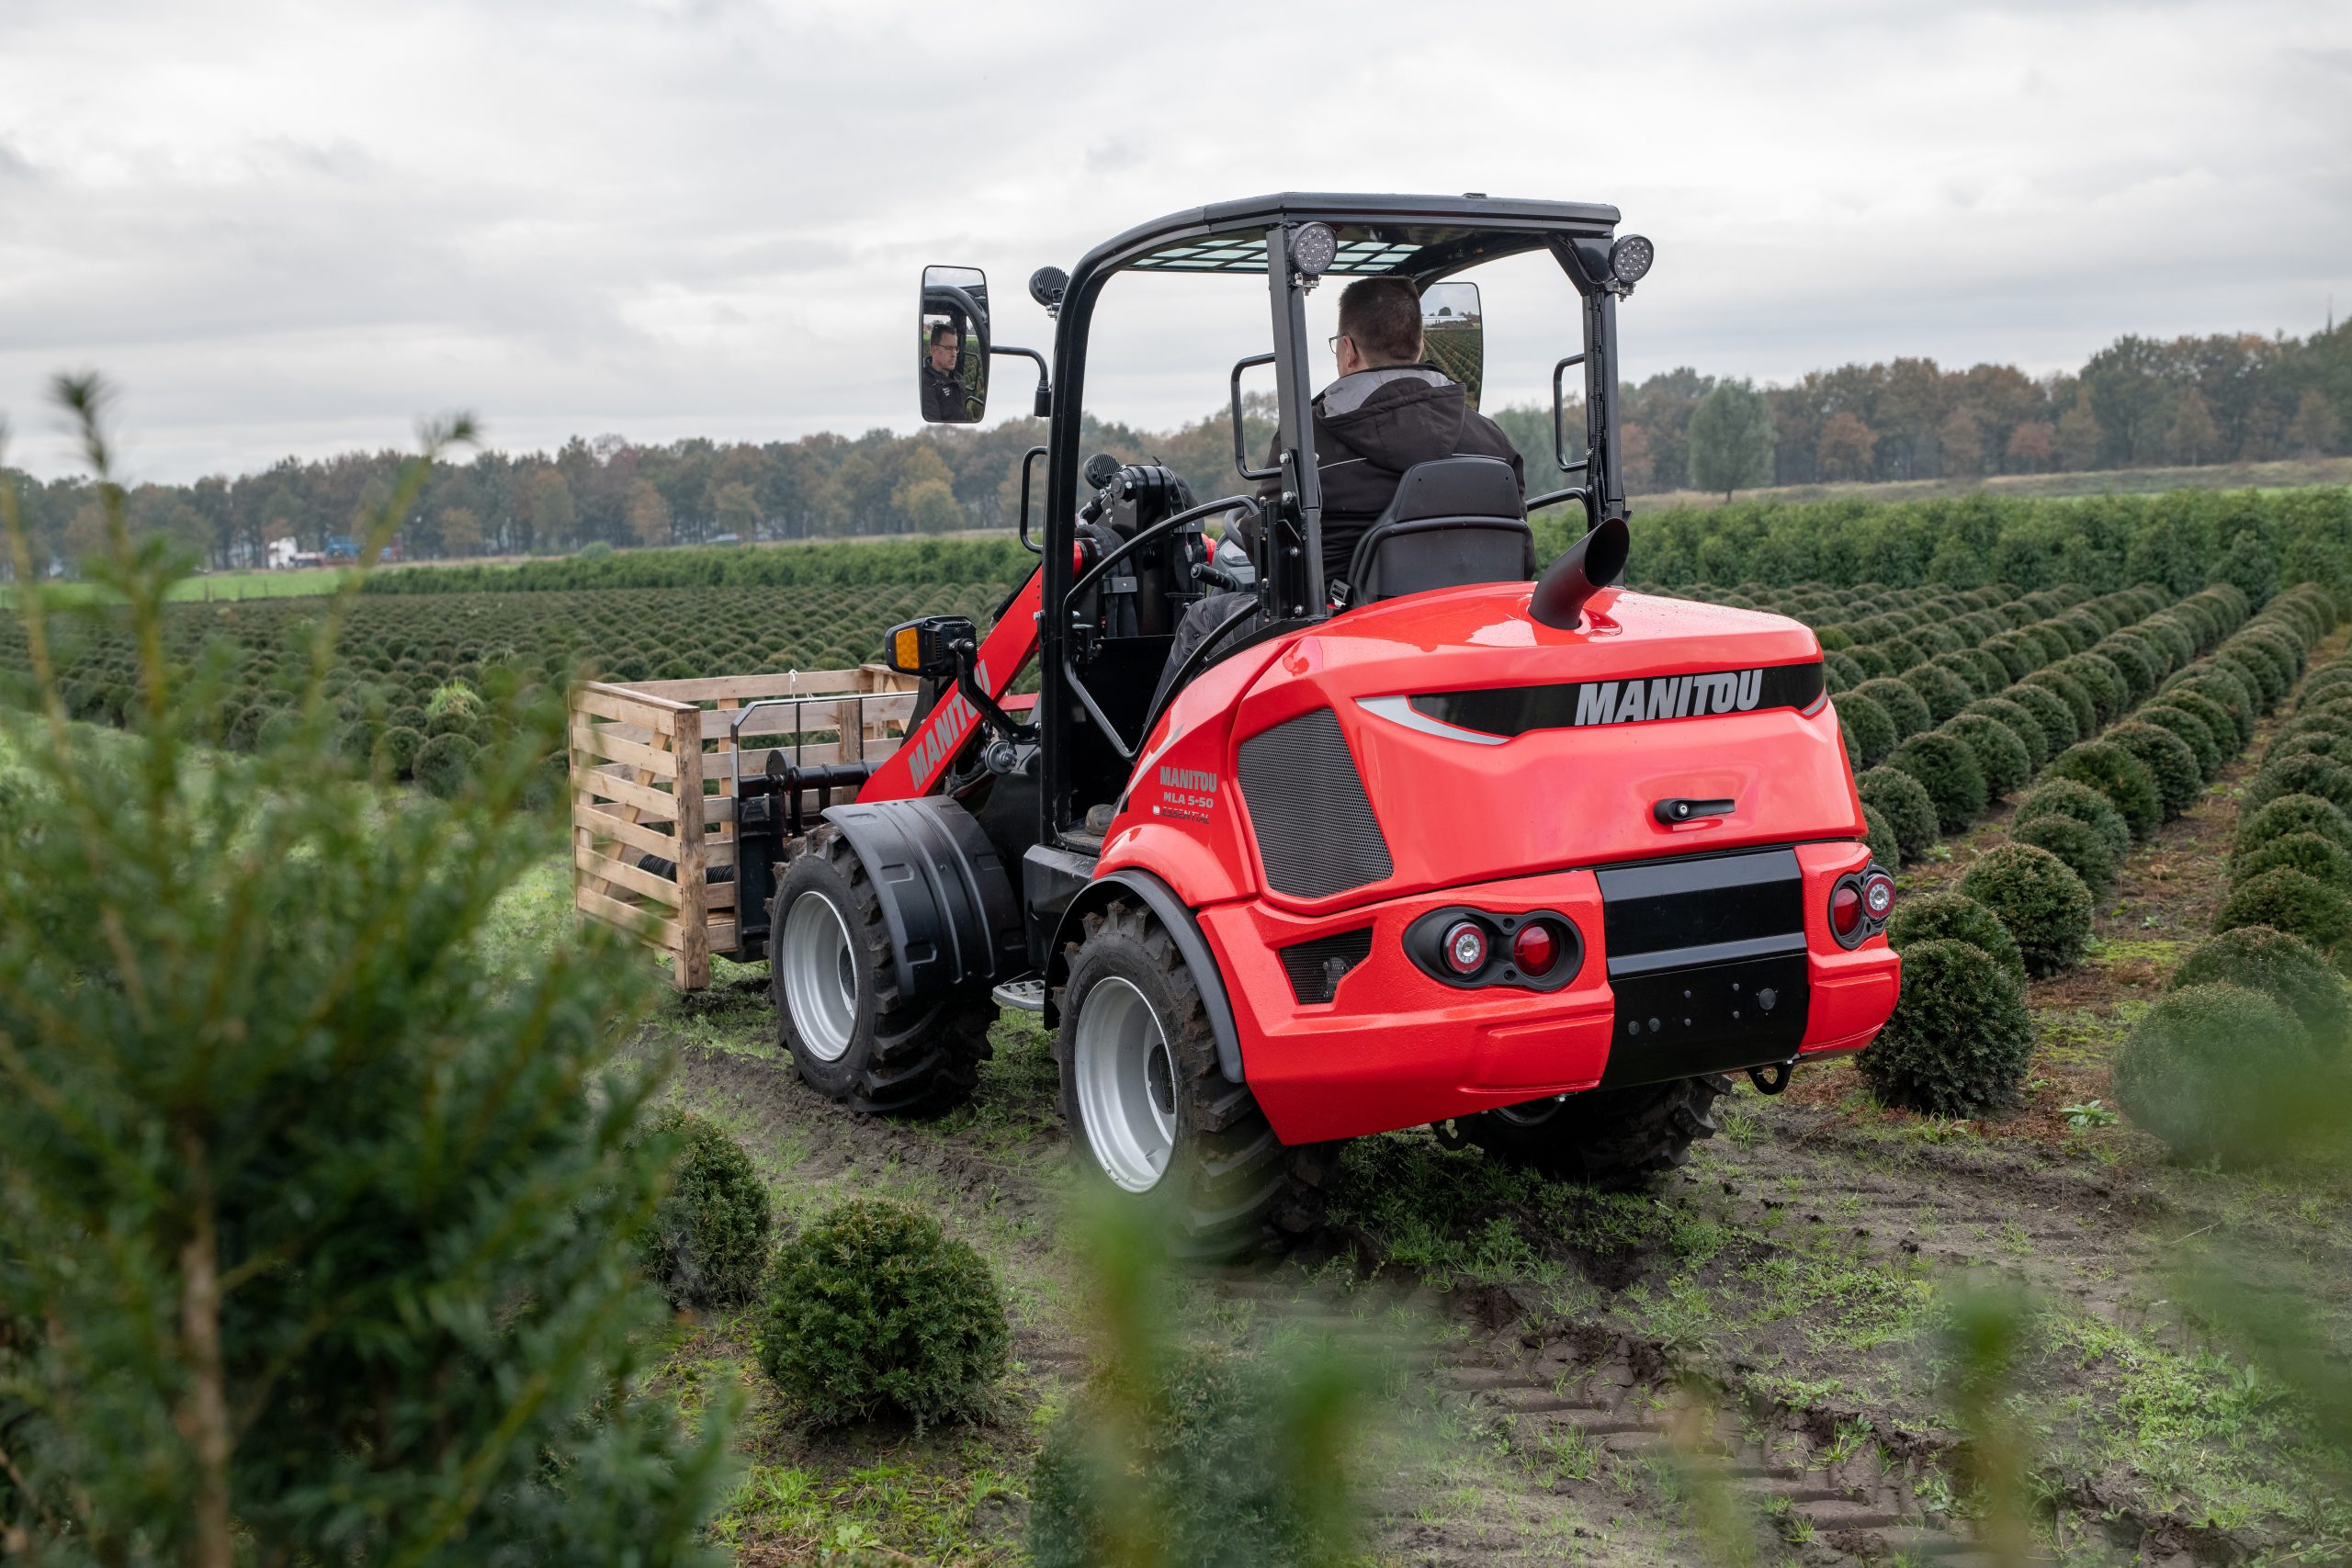 New range of articulated loaders